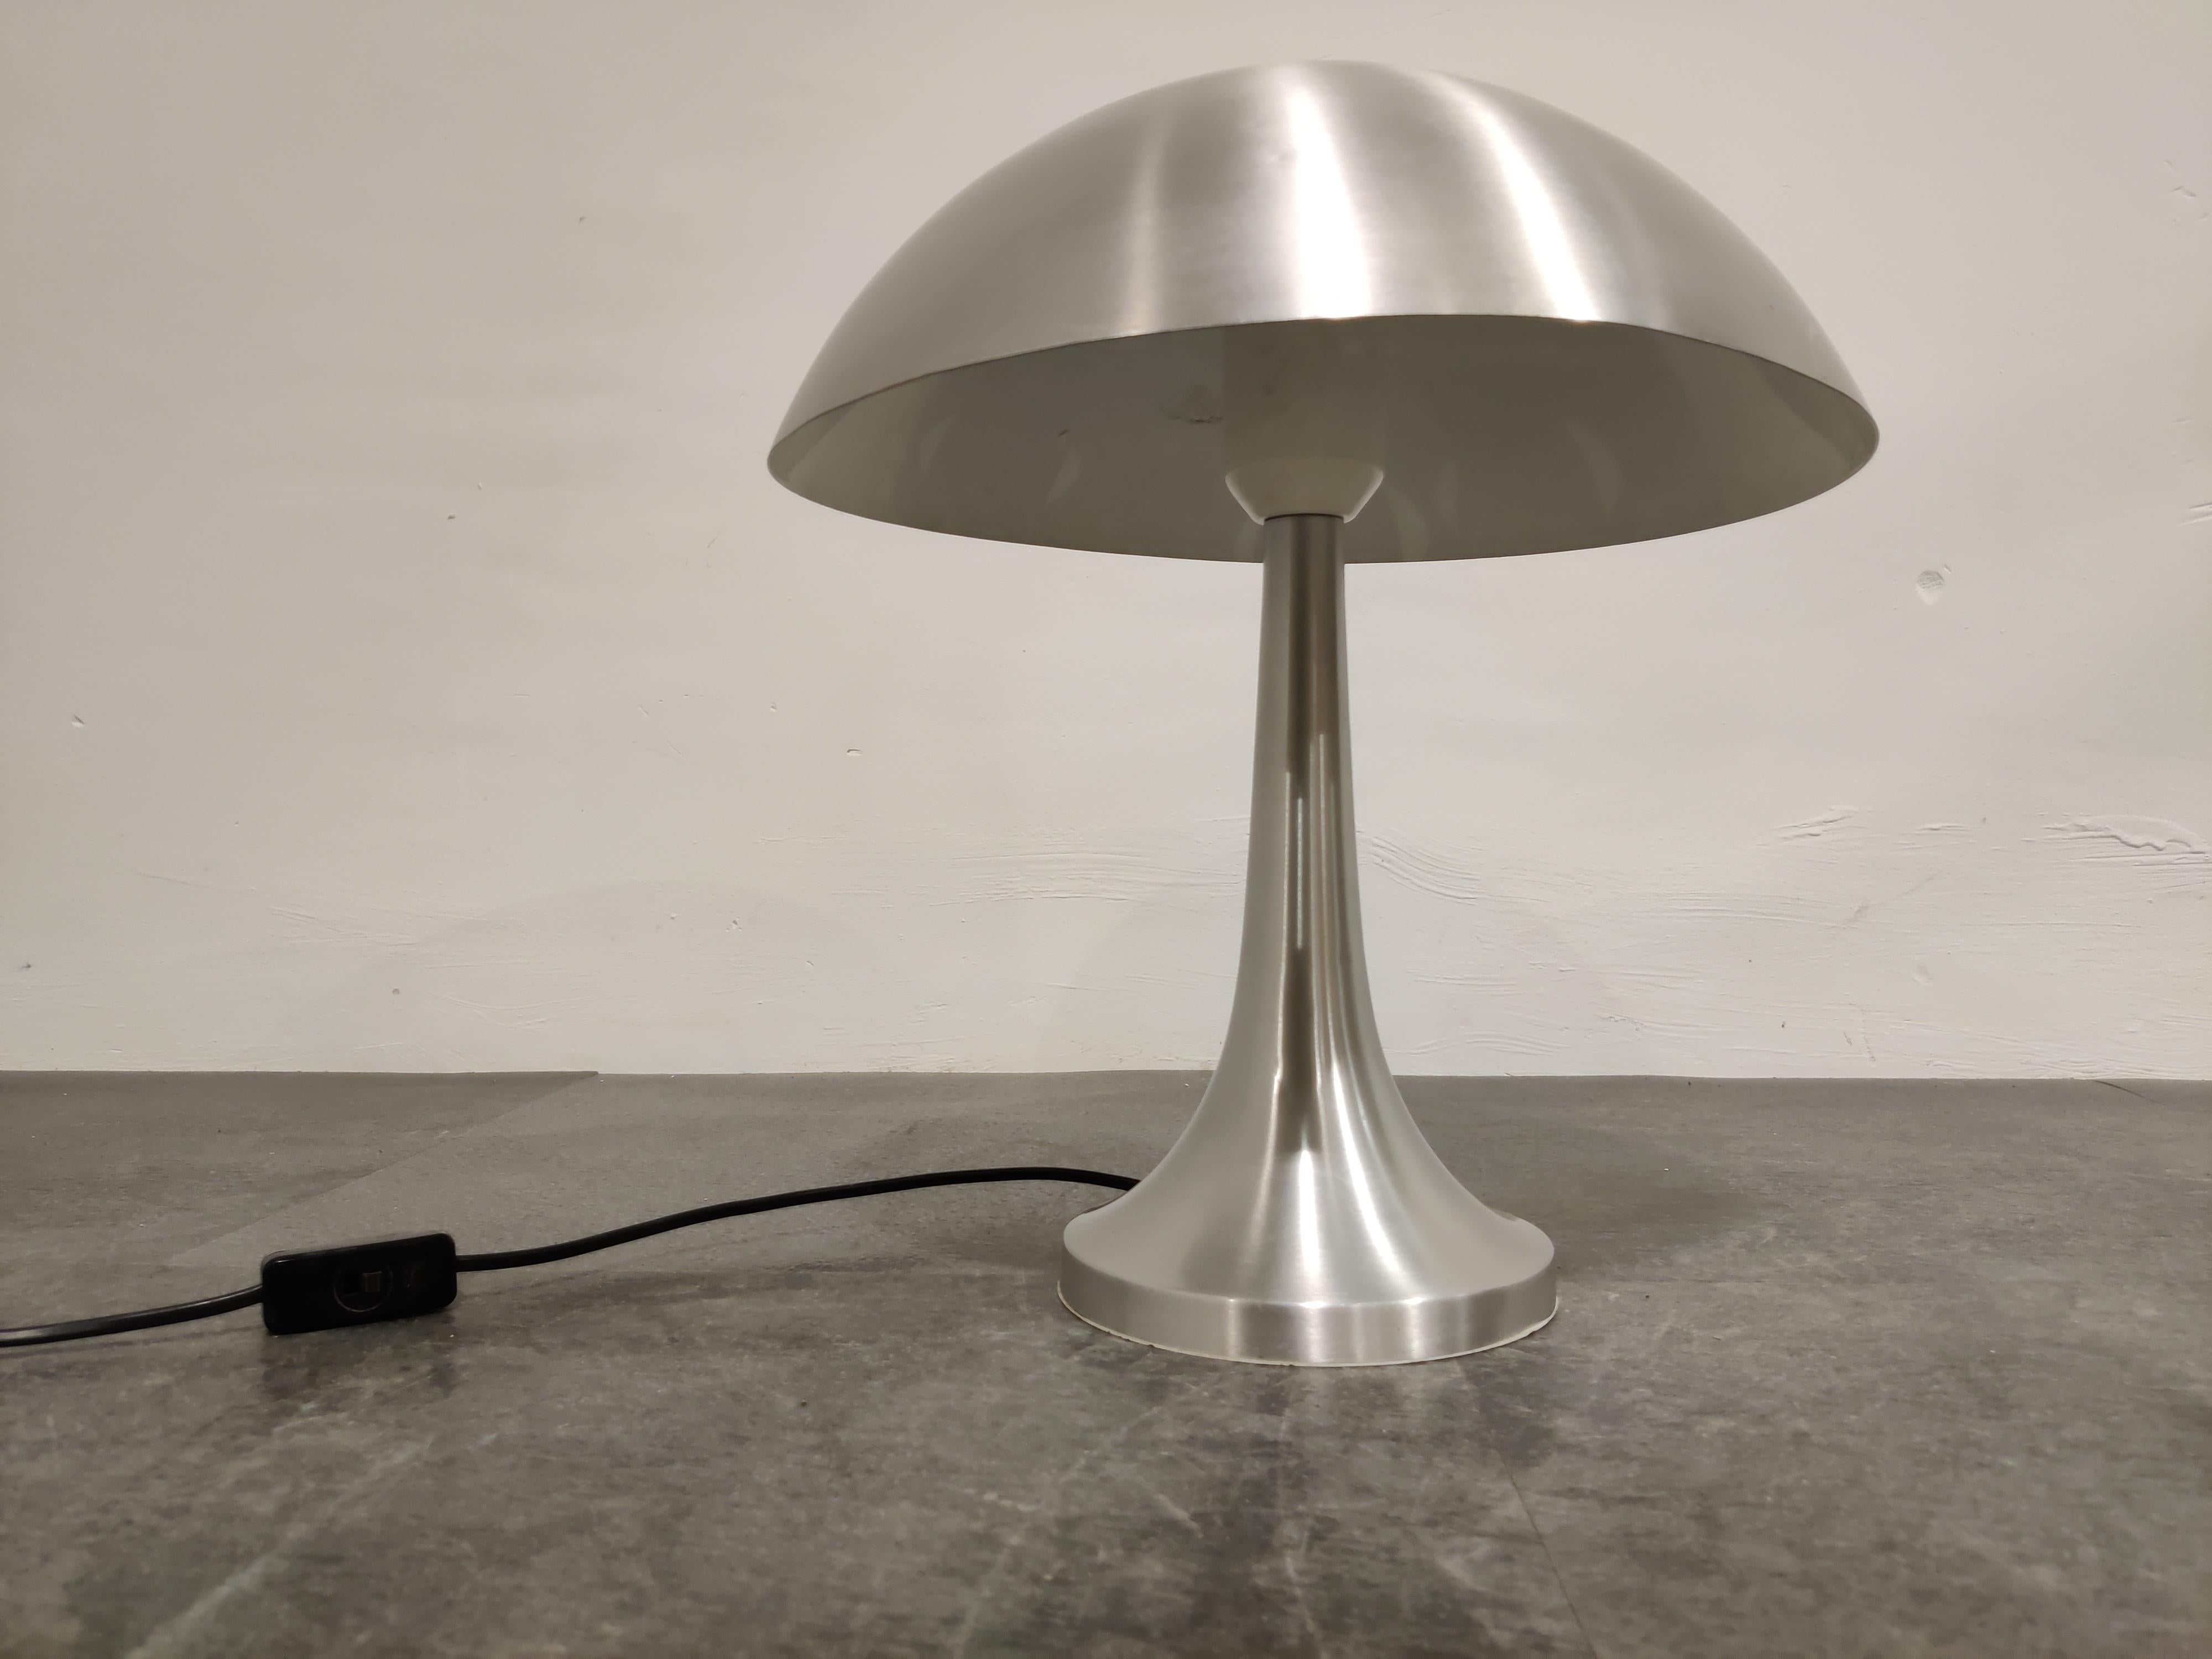 Vintage mushroom table lamp designed by Louis Christiaan Kalff for Philips.

The lamp has a beautiful shape and the aluminum gives it a special touch.

Condition: Very minor small dents on the shade and some scratches.

Tested and ready for